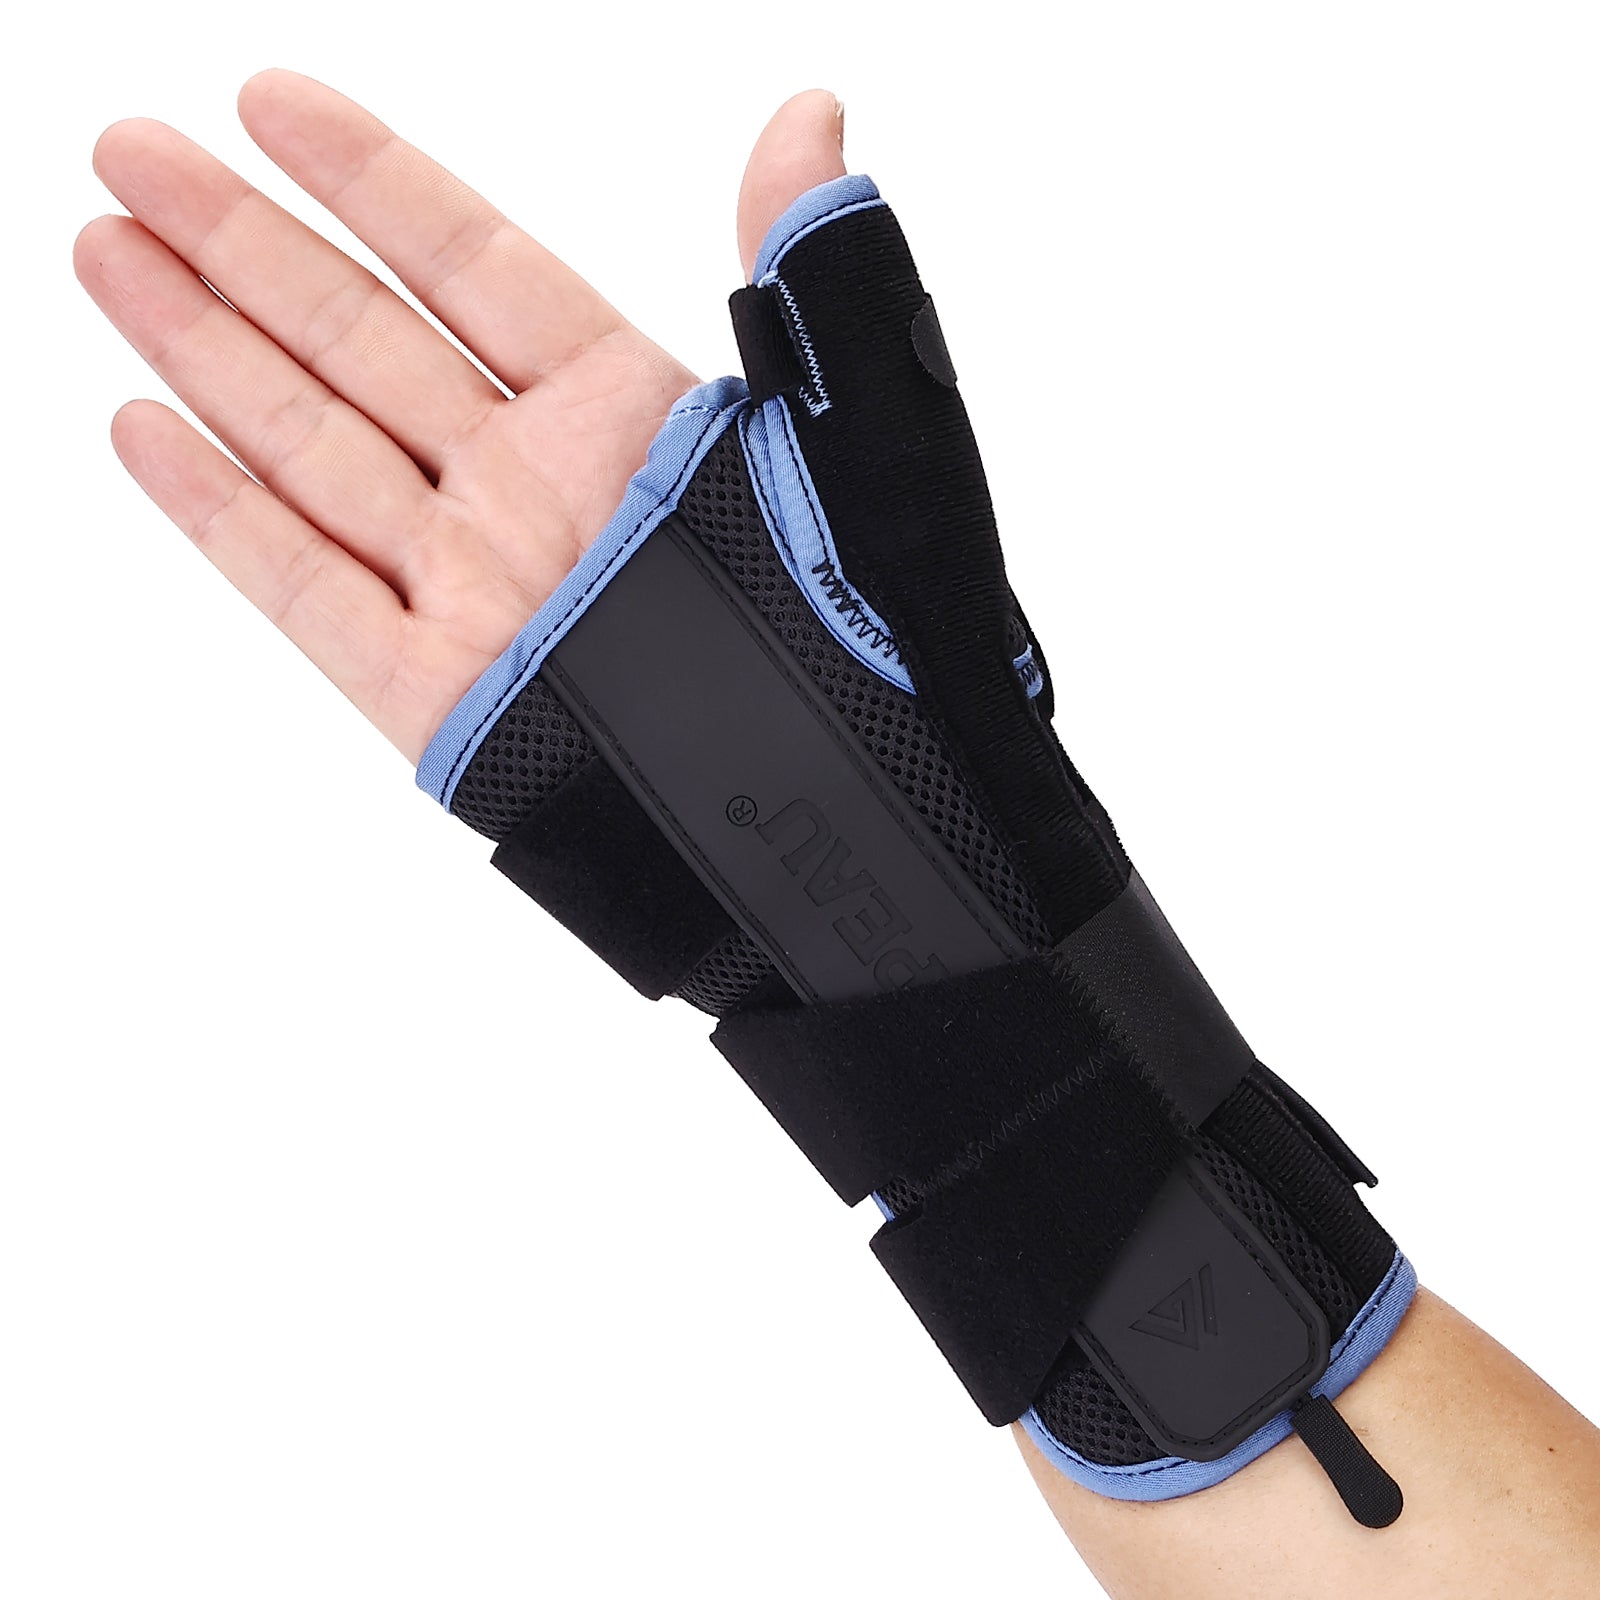  Wrist Brace, Carpal Tunnel Braces, Splint Supports, Right &  Left Pair, Two (2), Small/Medium, Fitted Pain Relief, Reduced Recovery  Time, Forearm Compression, Breathable, Sprain, Arthritis, Tendinitis :  Health & Household